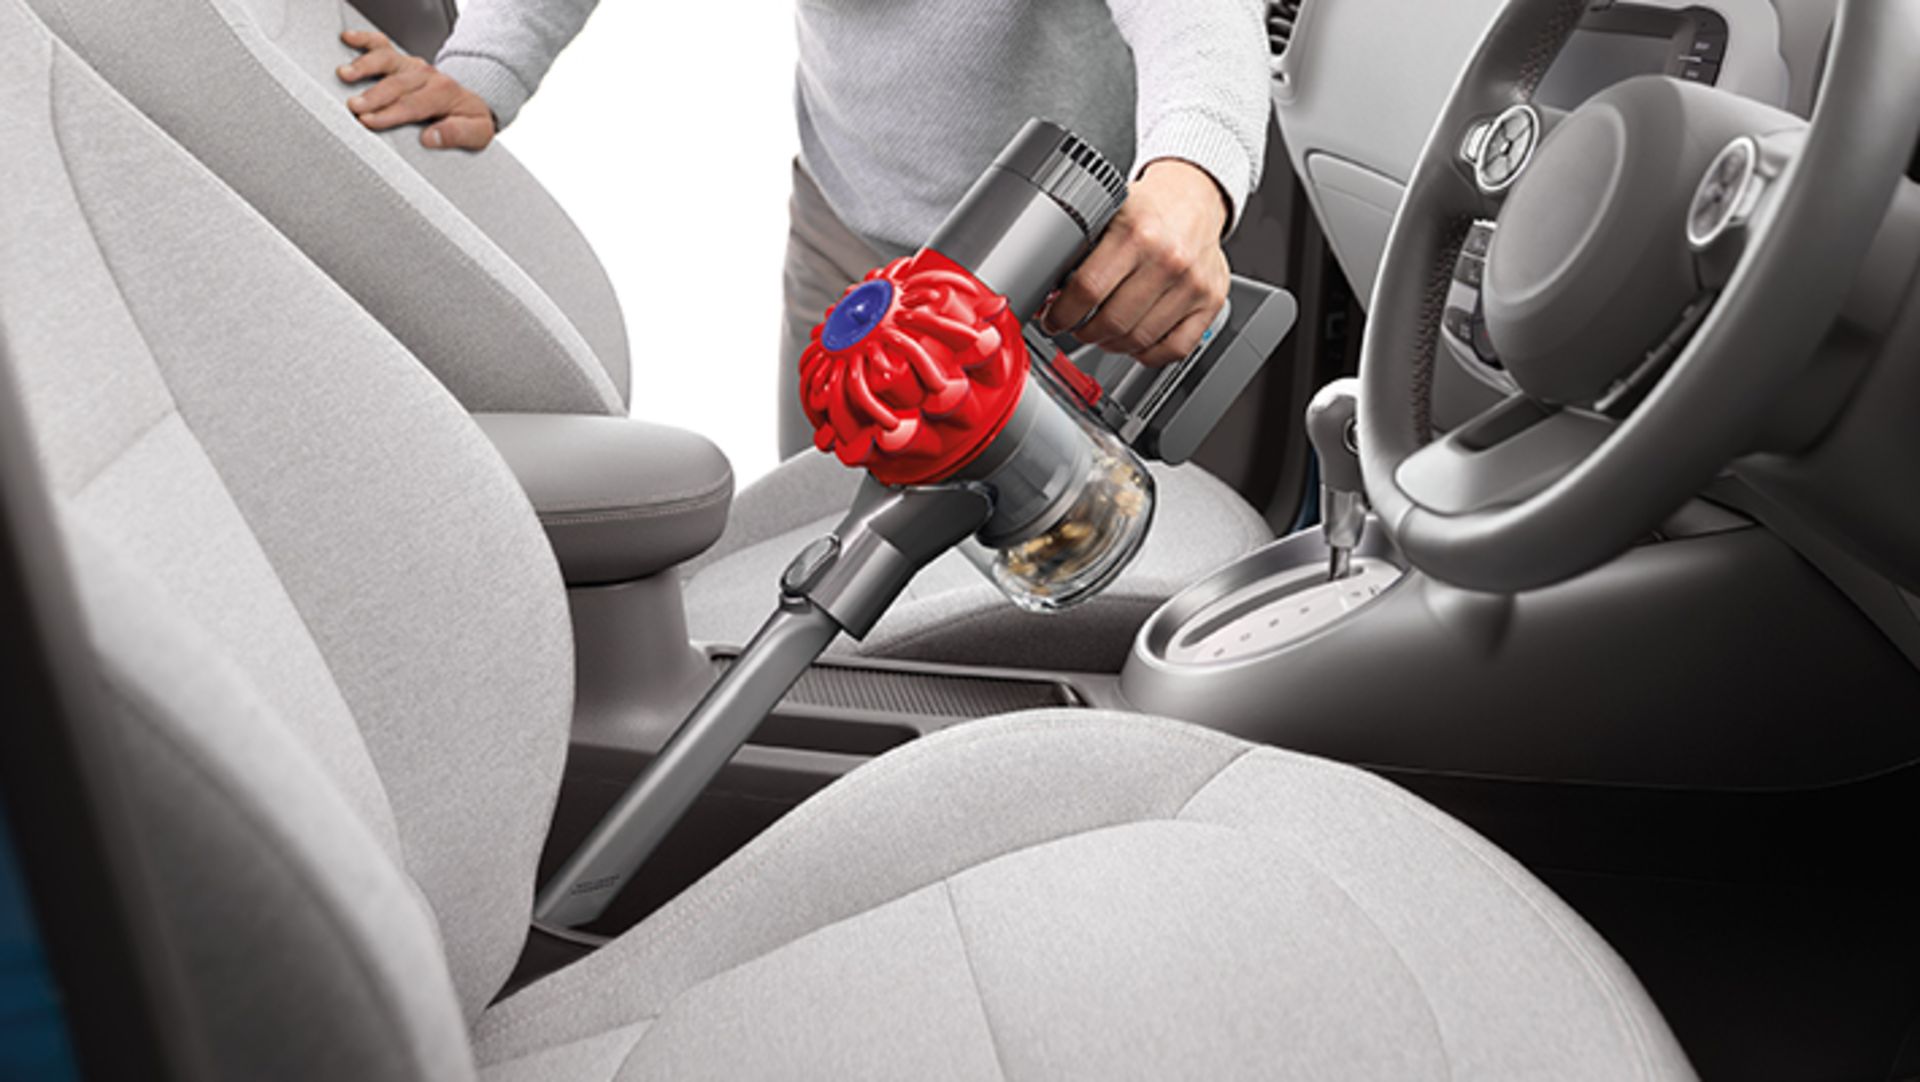 V *TRADE QTY* Brand New Dyson V6 Handheld Vacuum Cleaner with Car and Boat Accessory Set - - Image 5 of 7